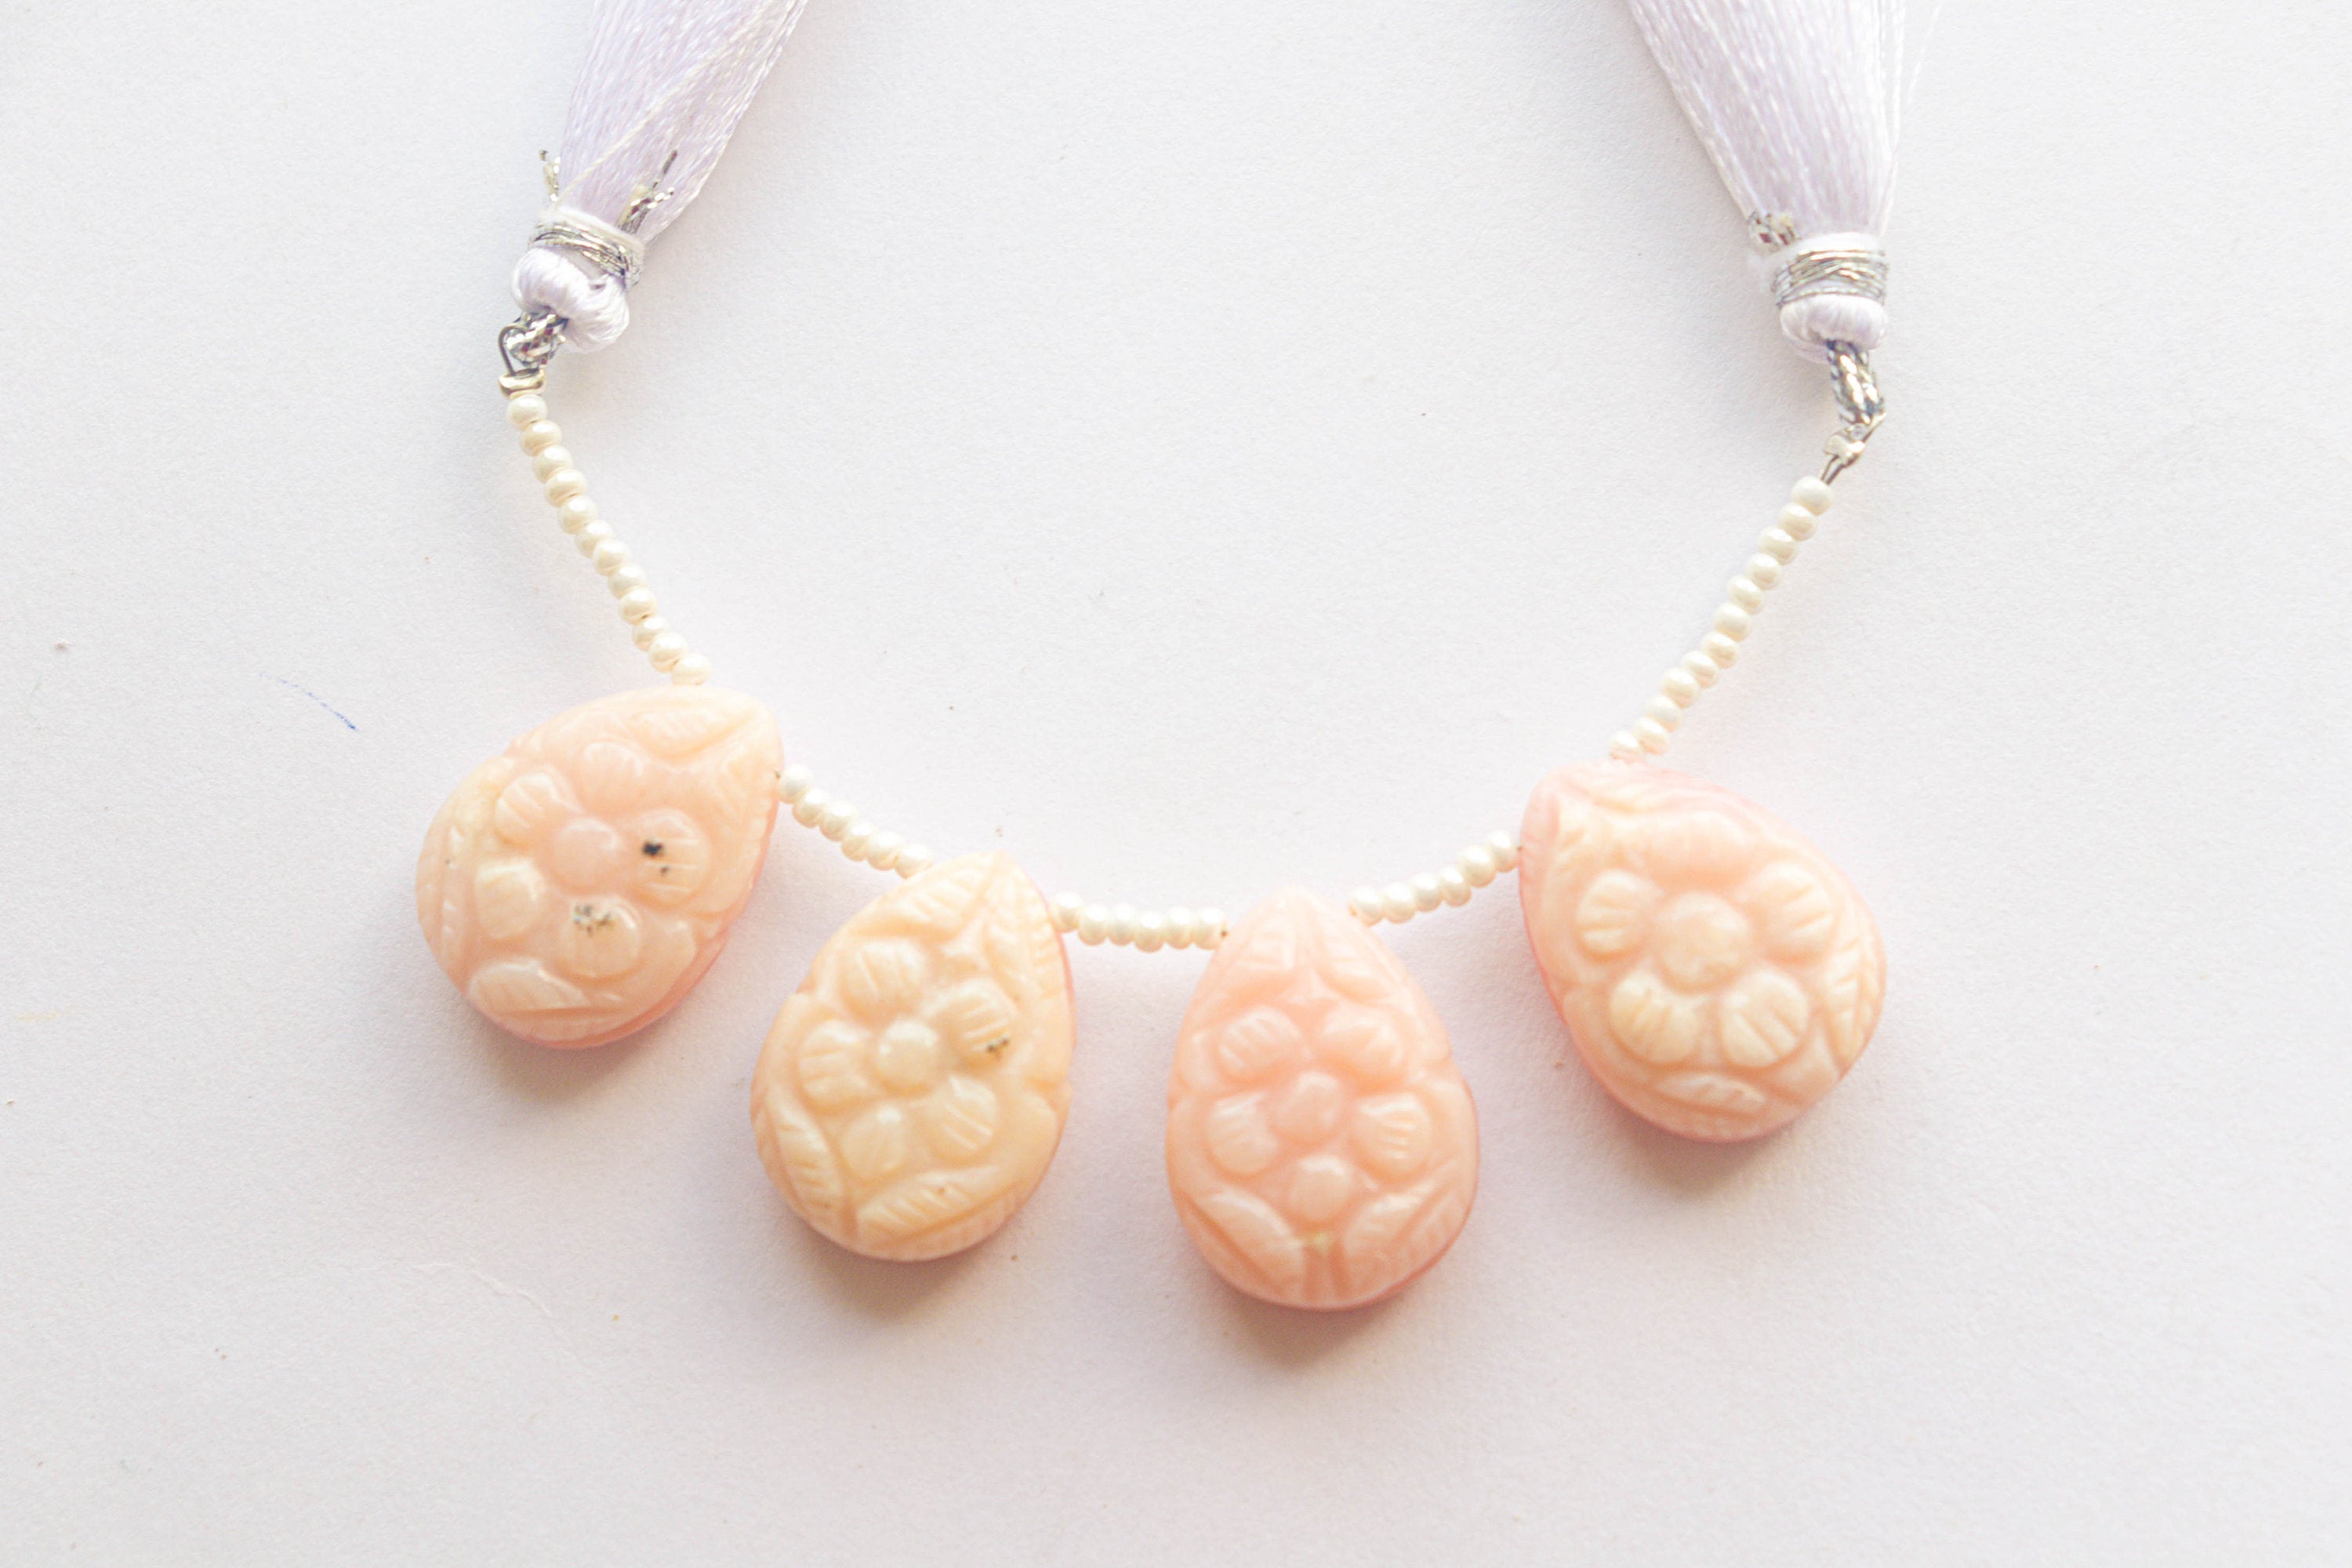 Natural Pink Opal Flower Carving Pear Shape Beads | 15x20mm | 4 Pieces | Natural Gemstone | Beadsforyourjewellery BFYJ1171-2 Beadsforyourjewelry